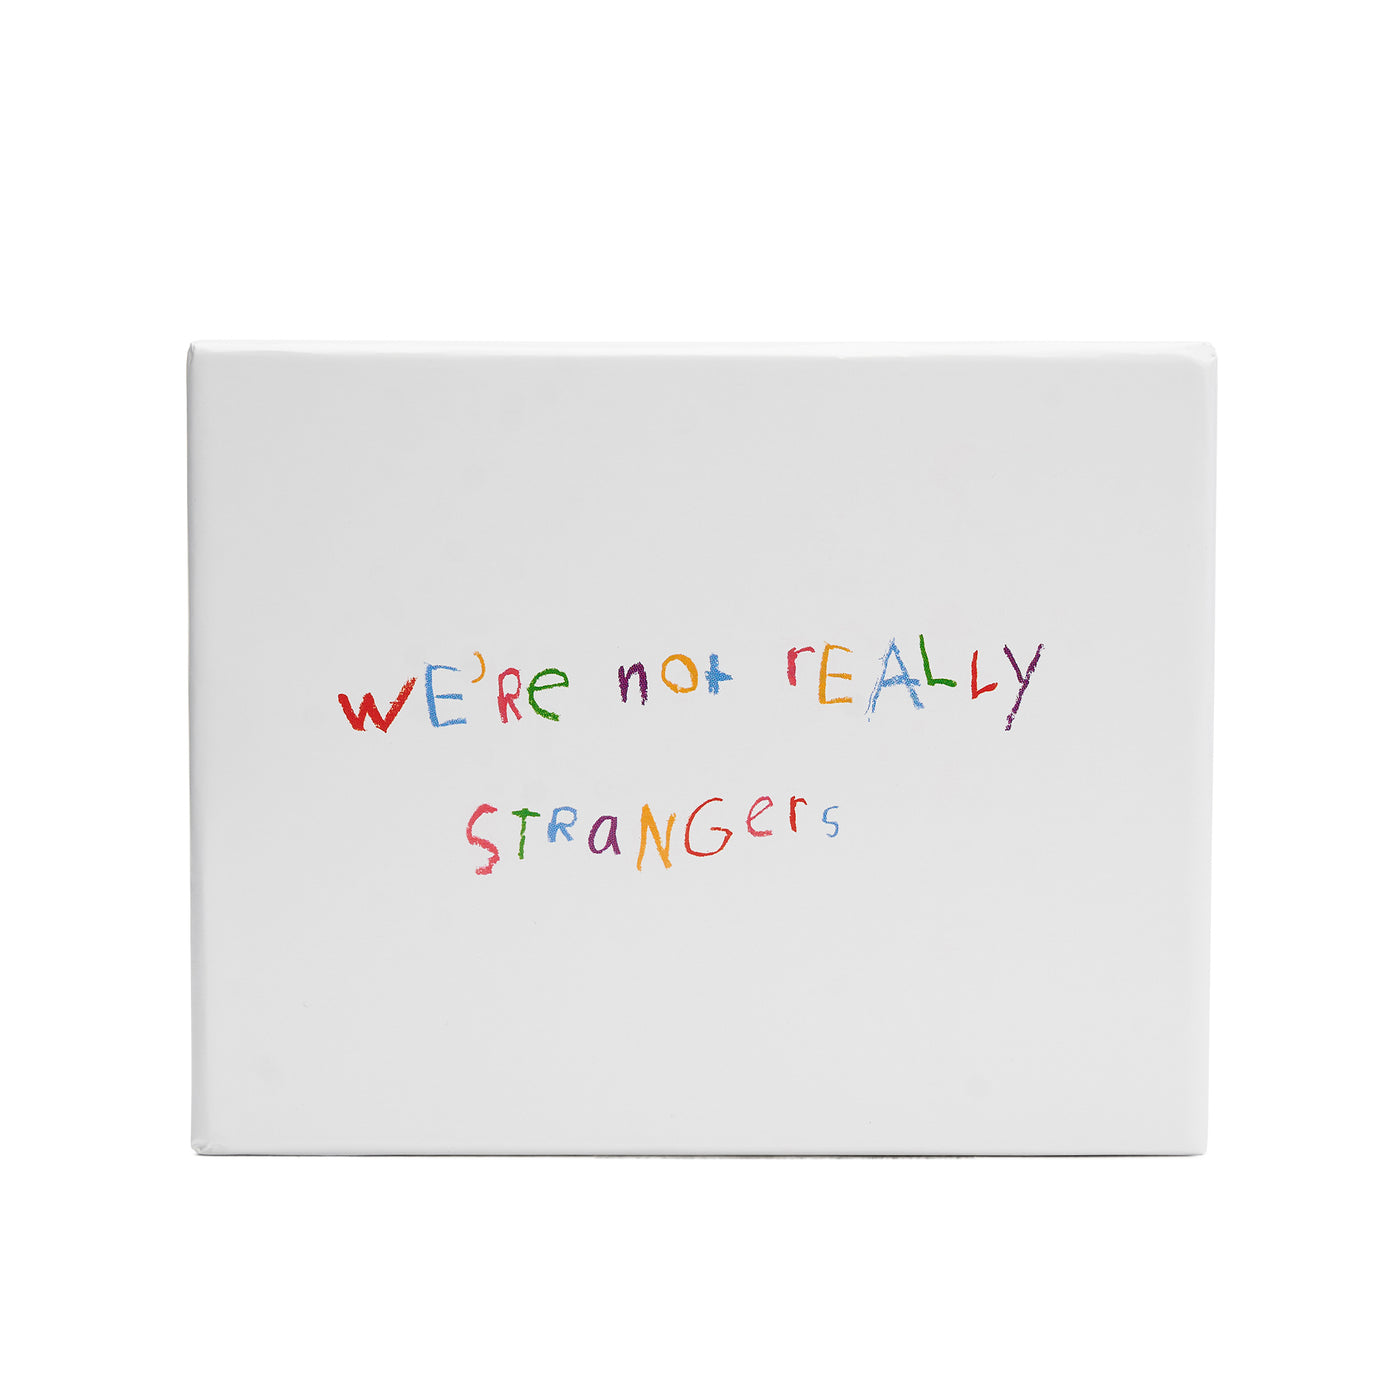 We're Not Really Strangers Kids Edition. Front facing view of white box reading 'We're Not Really Strangers' in rainbow crayon handwritten text.